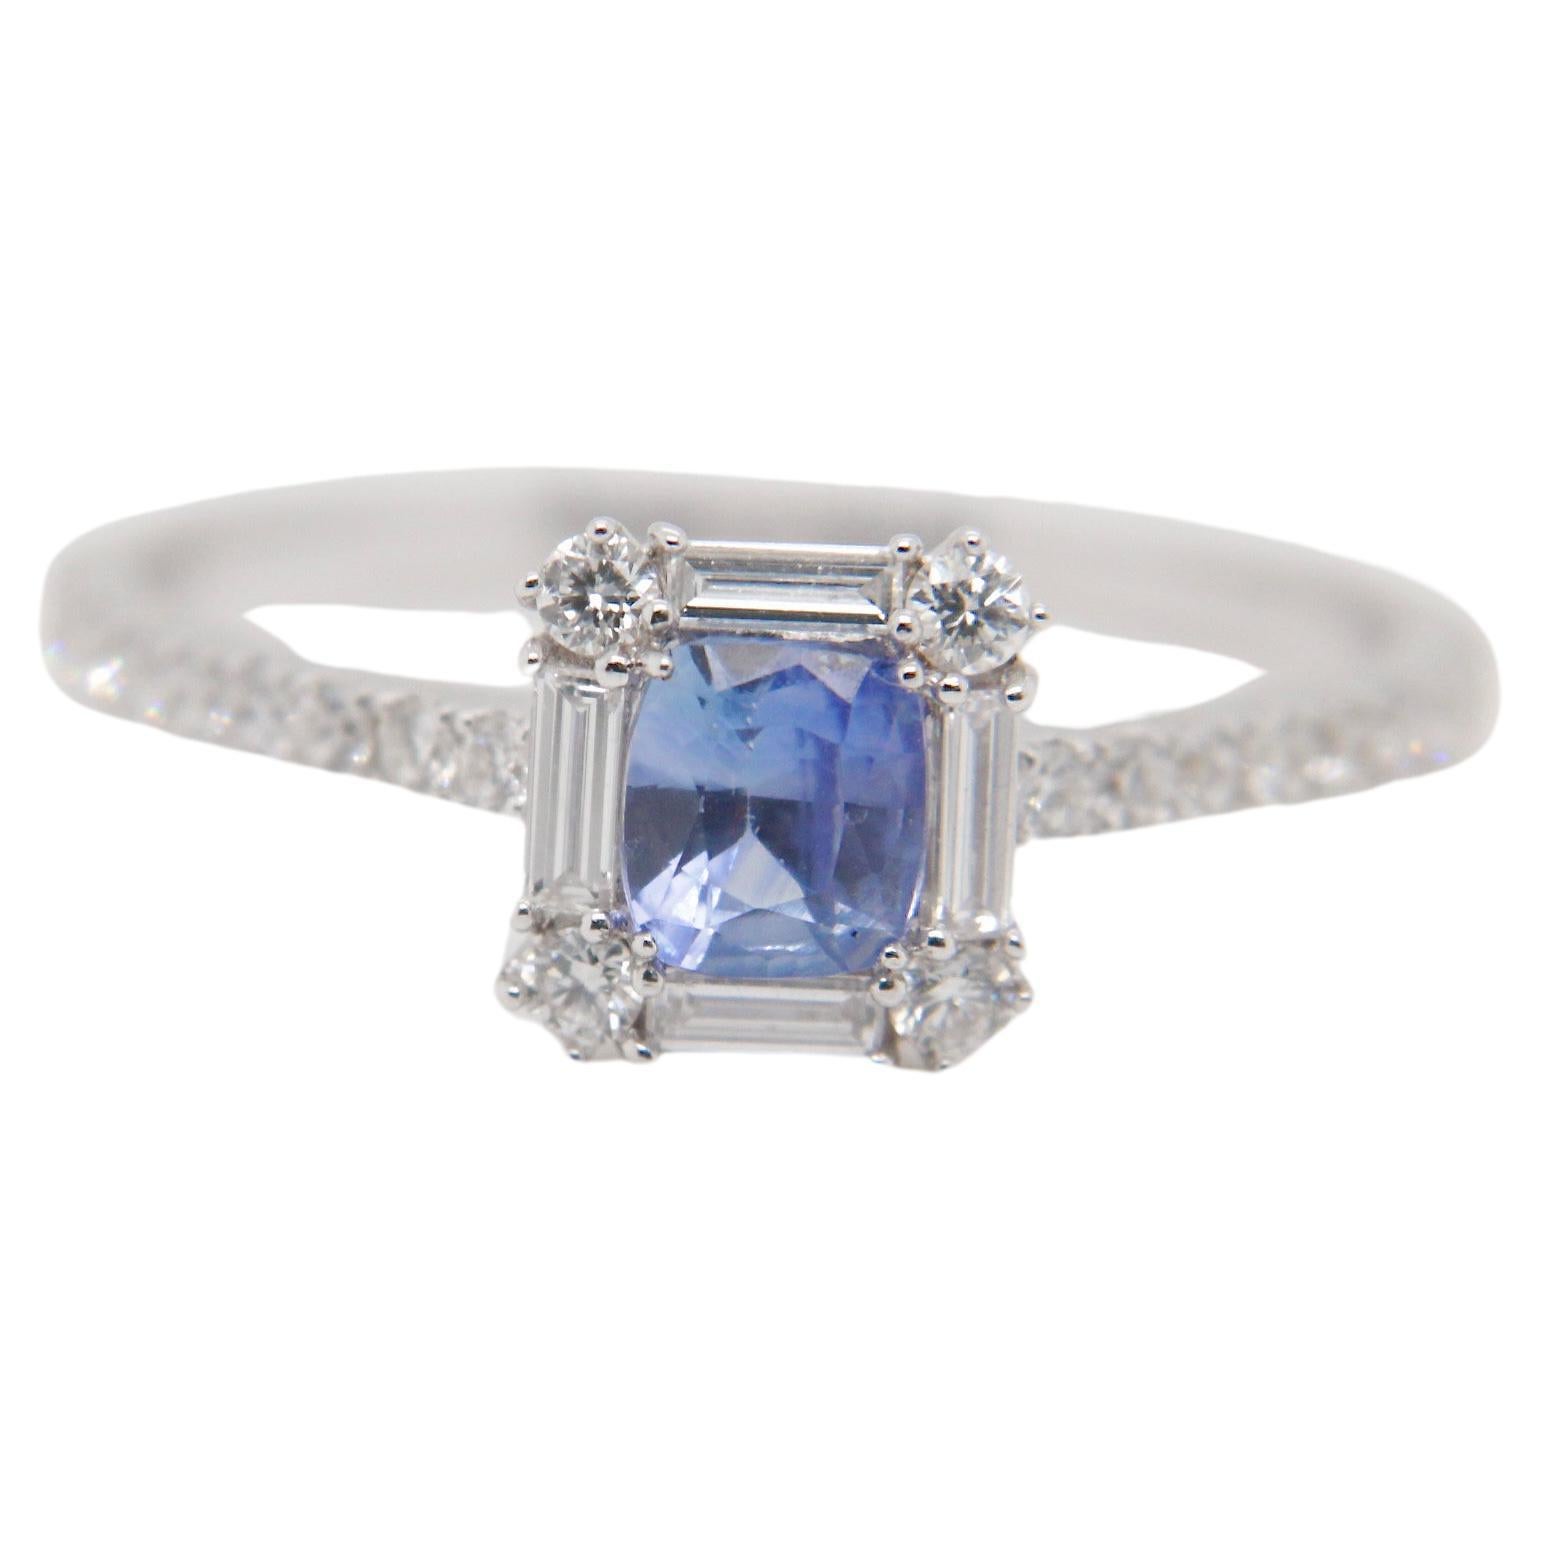 A brand new blue sapphire and diamond ring by Rewa Jewellery. One of our best seller designs is now available with a Kashmir Sapphire!

The gemstone has a sky blue colour and is certified as a 0.52 carat natural sapphire from Kashmir without and